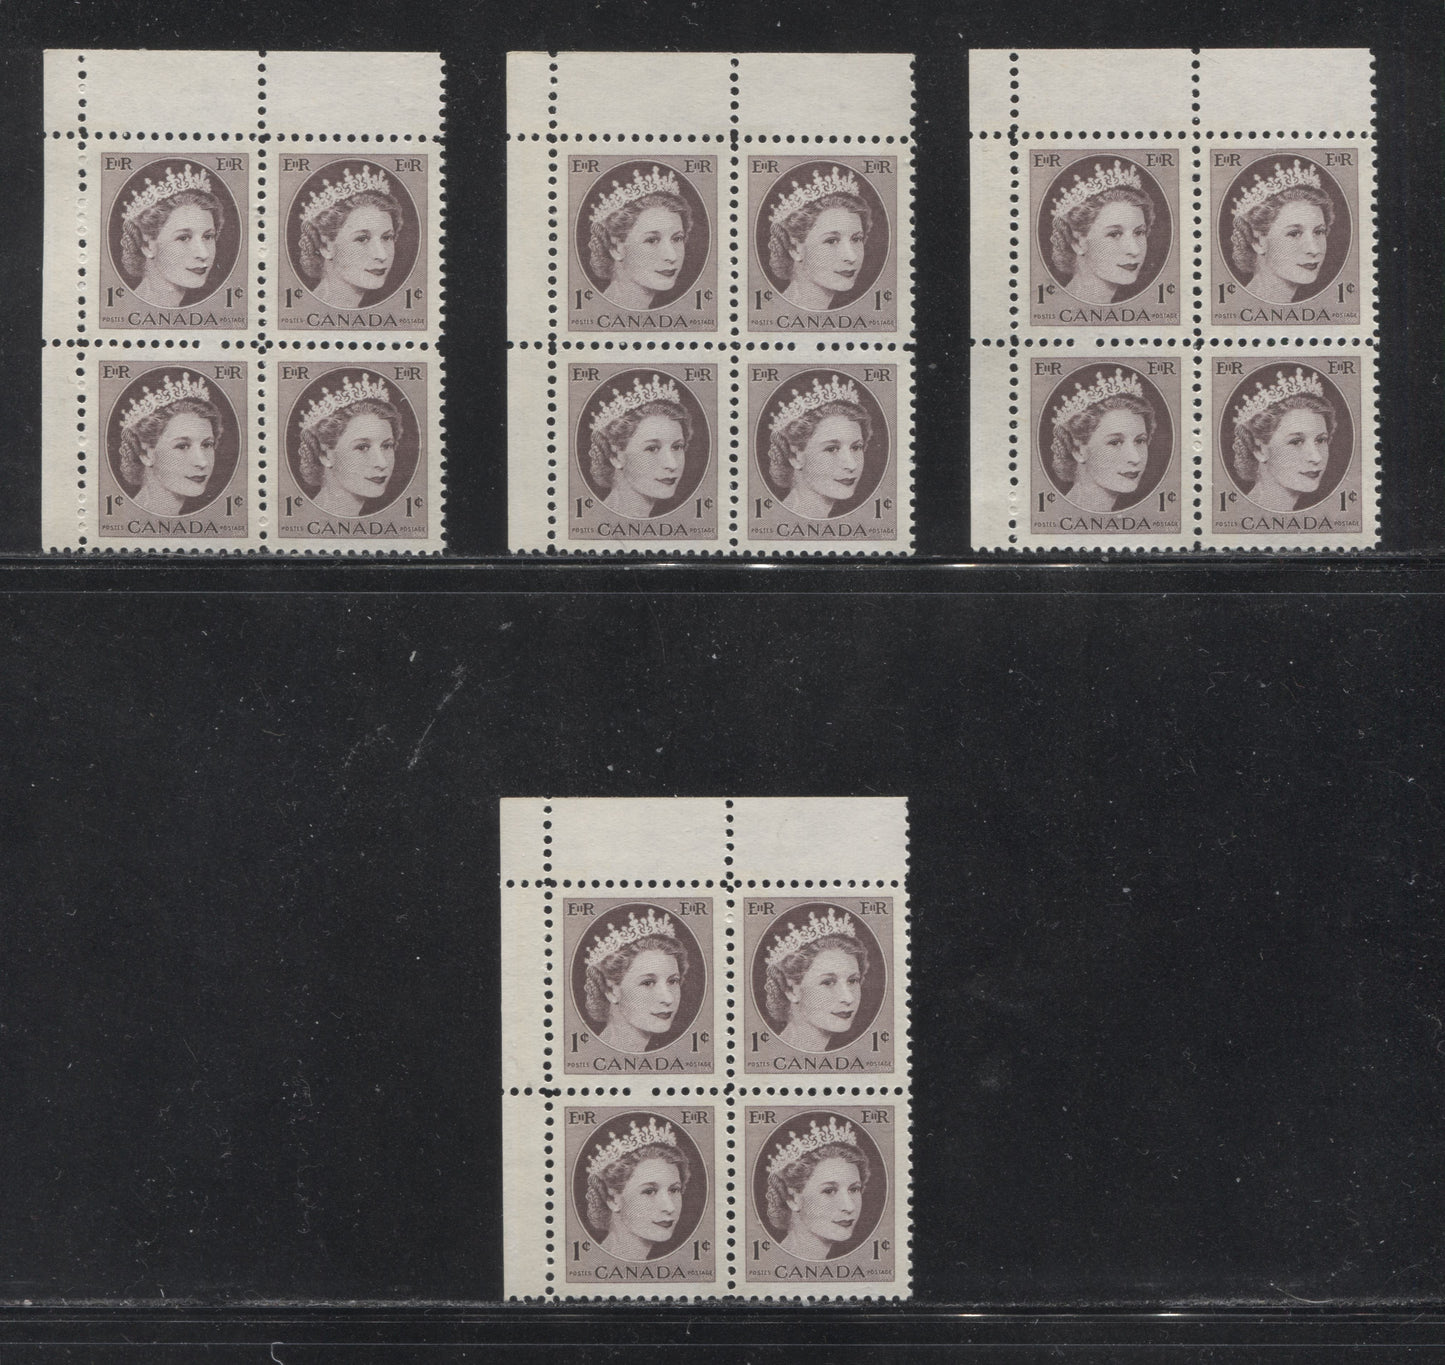 Canada #337p(var) 1c Chocolate Queen Elizabeth II, 1954-1962 Wilding Issue, Upper Left Blank Winnipeg Tagged Blocks of 4, Four Different, Various Perfs., DF Gr Vertically Ribbed Paper, Streaky Semi Gloss Gum, Bluish White Tagging, Broken Perf. Pins, VFNH Brixton Chrome 